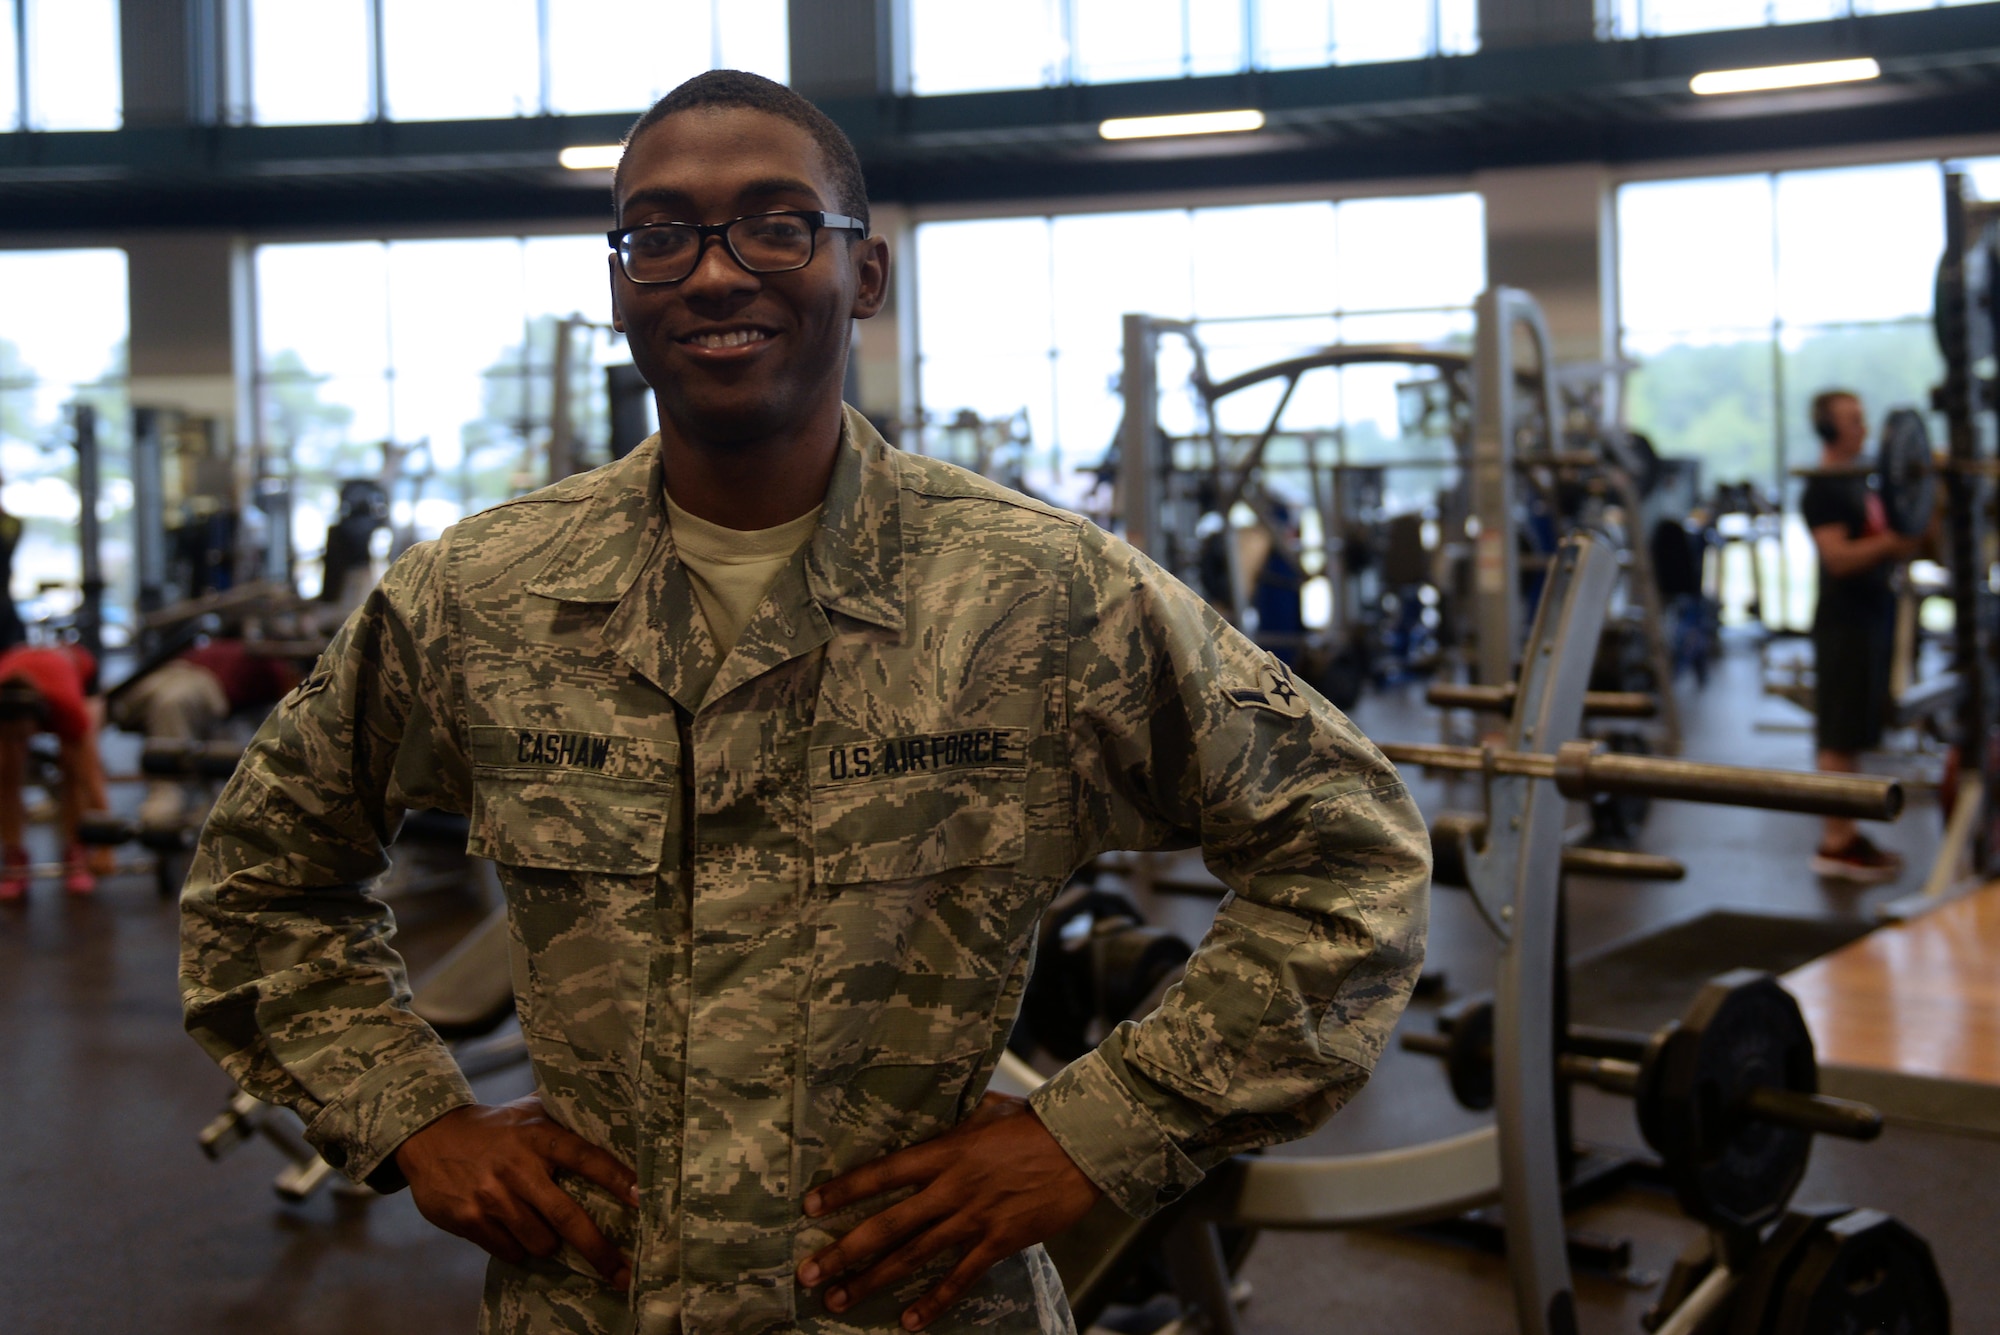 A man wearing the Airman Battle Uniform has his hands on his hips while looking at the camera with exercise equipment behind him. He's wearing glasses.